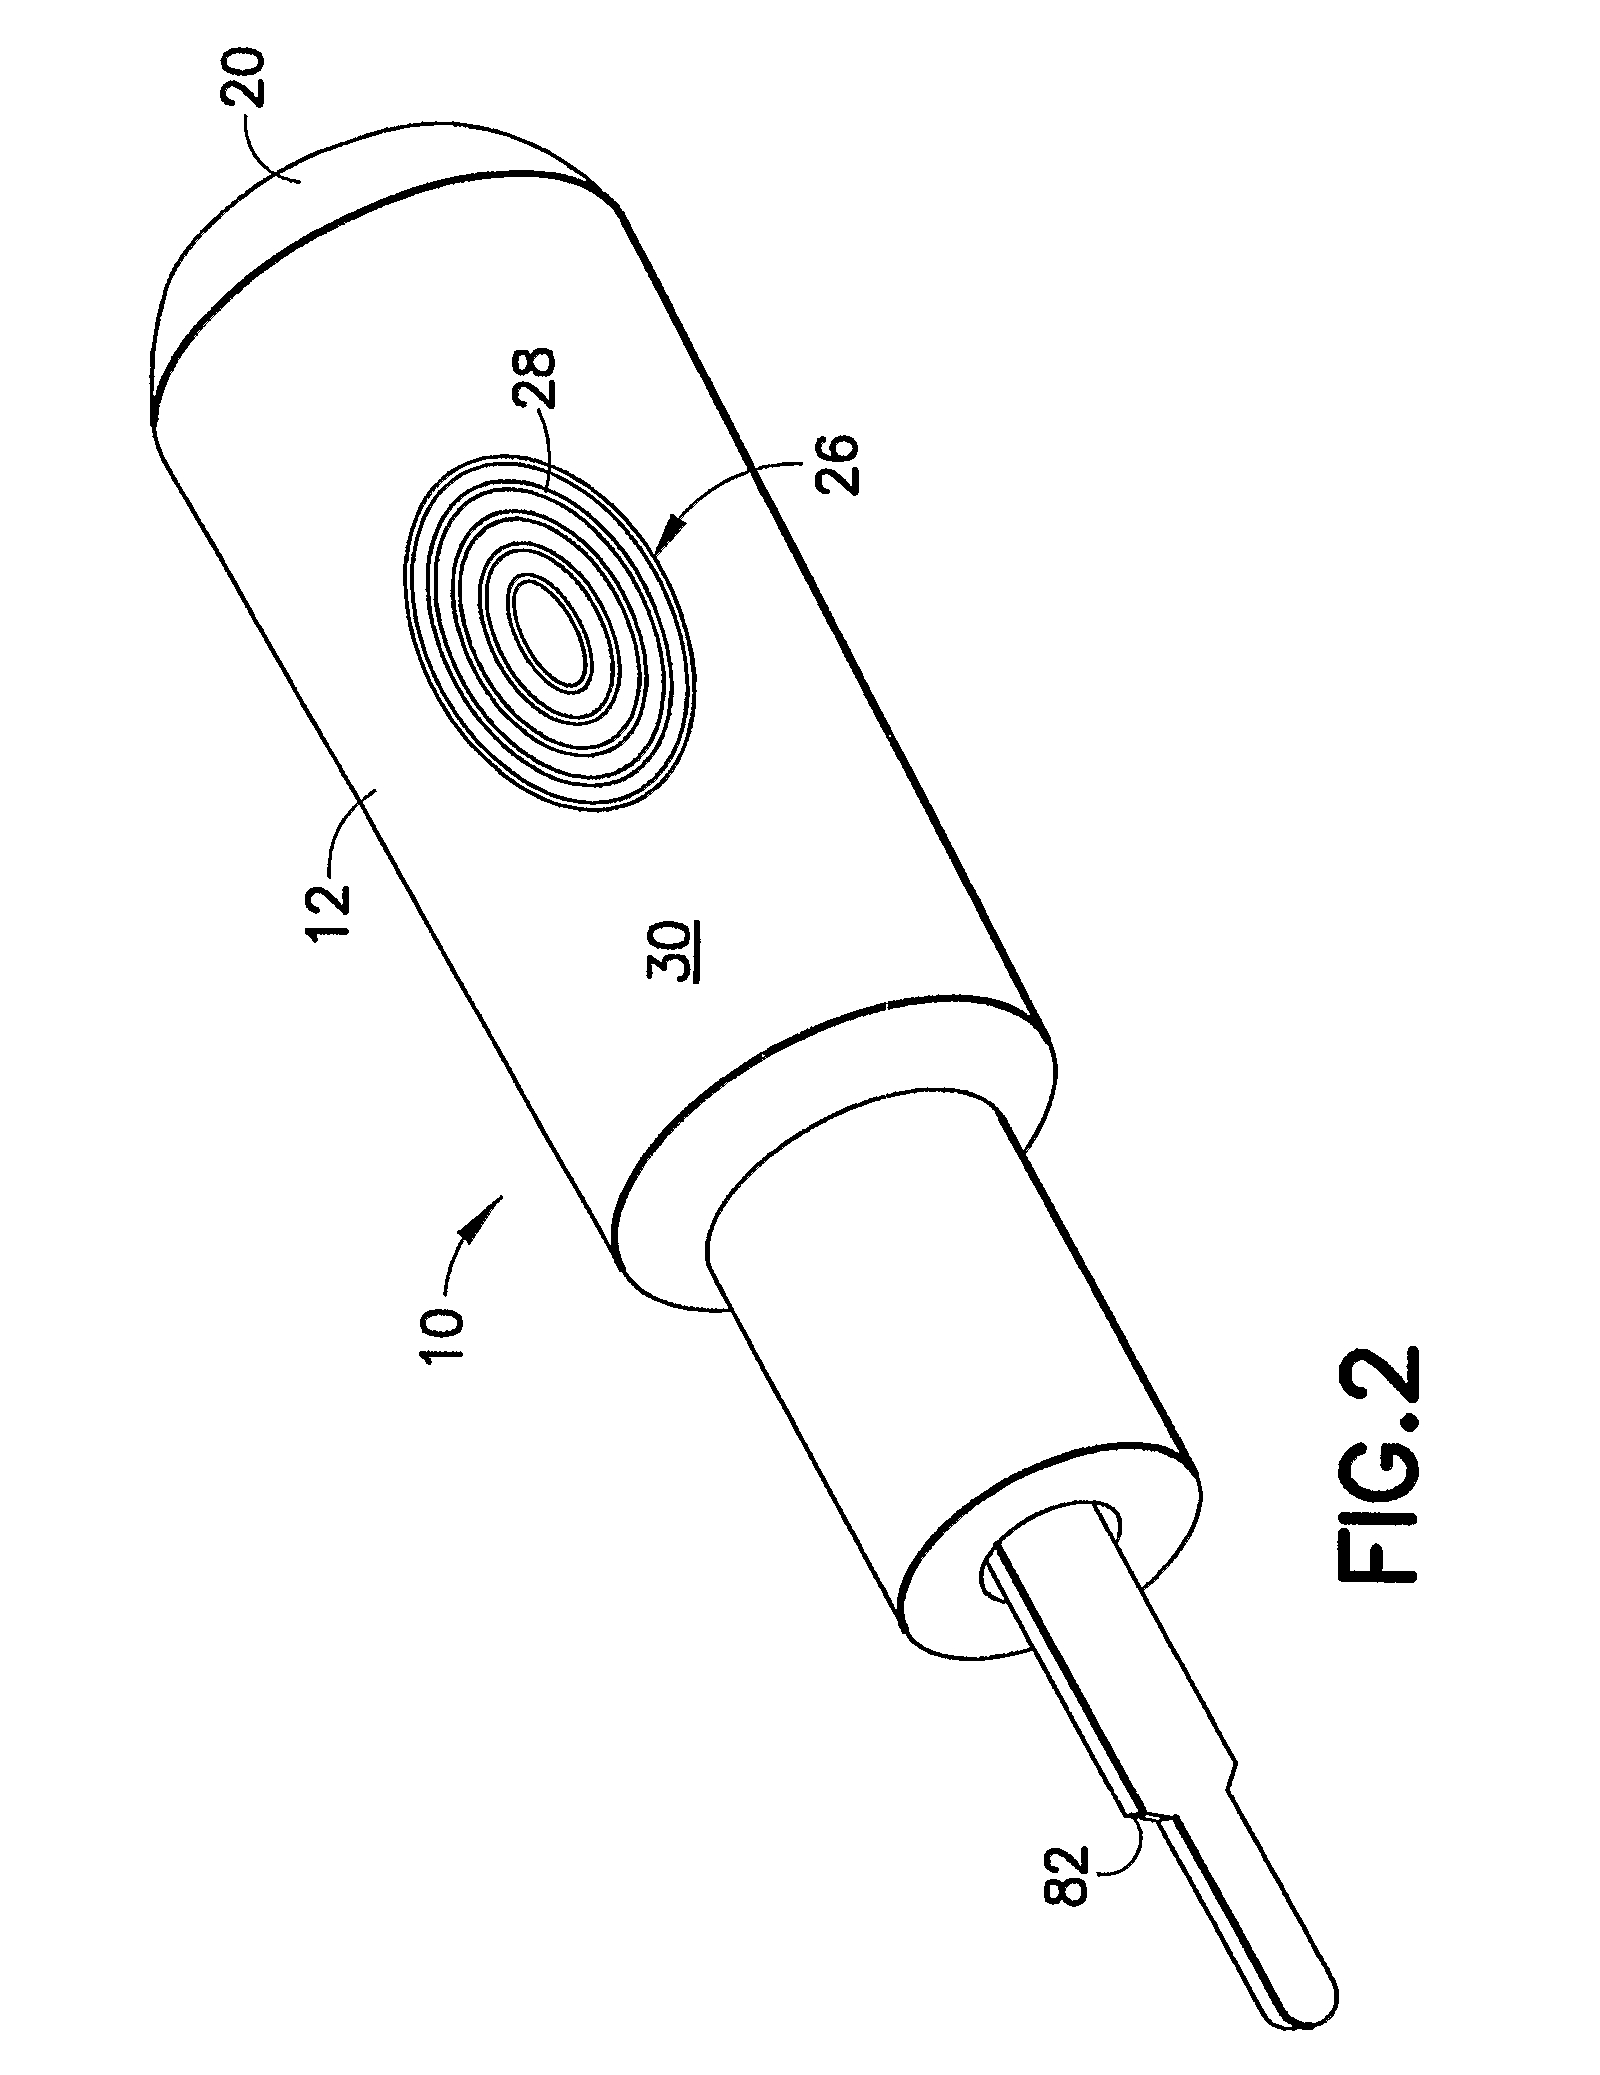 Squeeze activated medical puncturing device